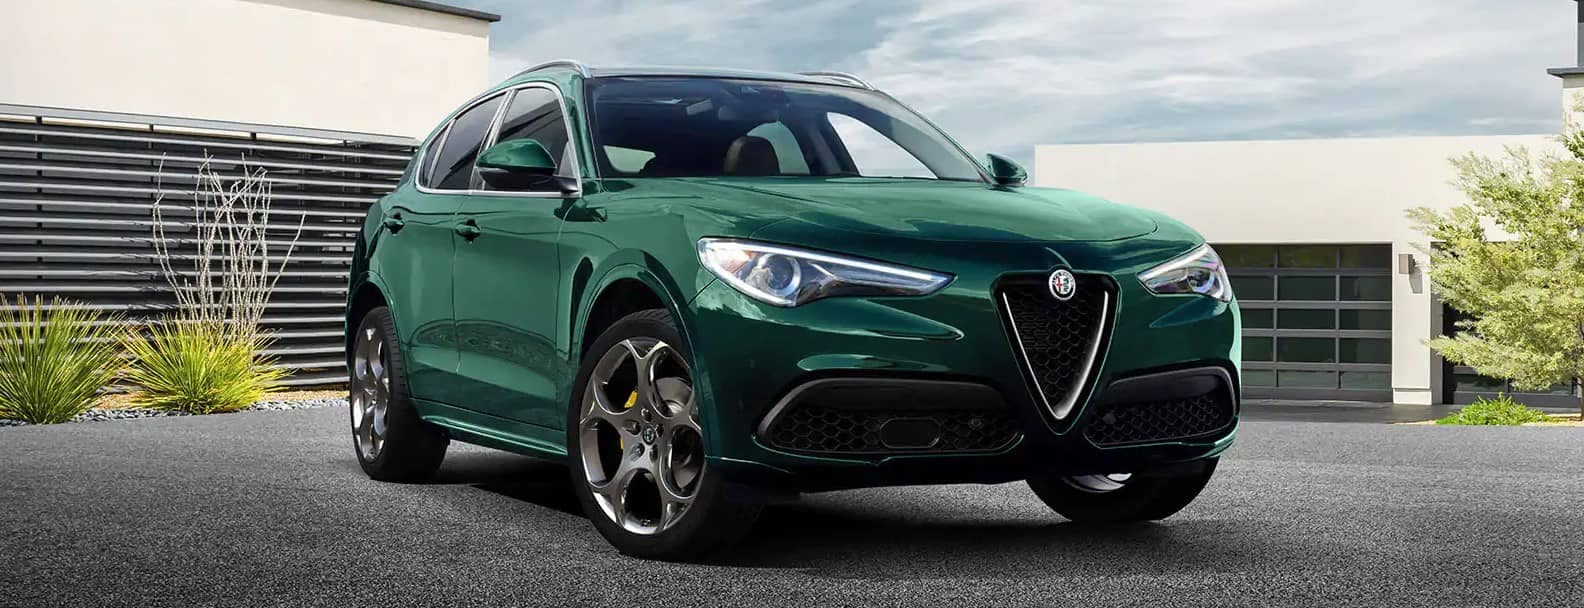 2021 Green Alfa Romeo Stelvio shown above with available options